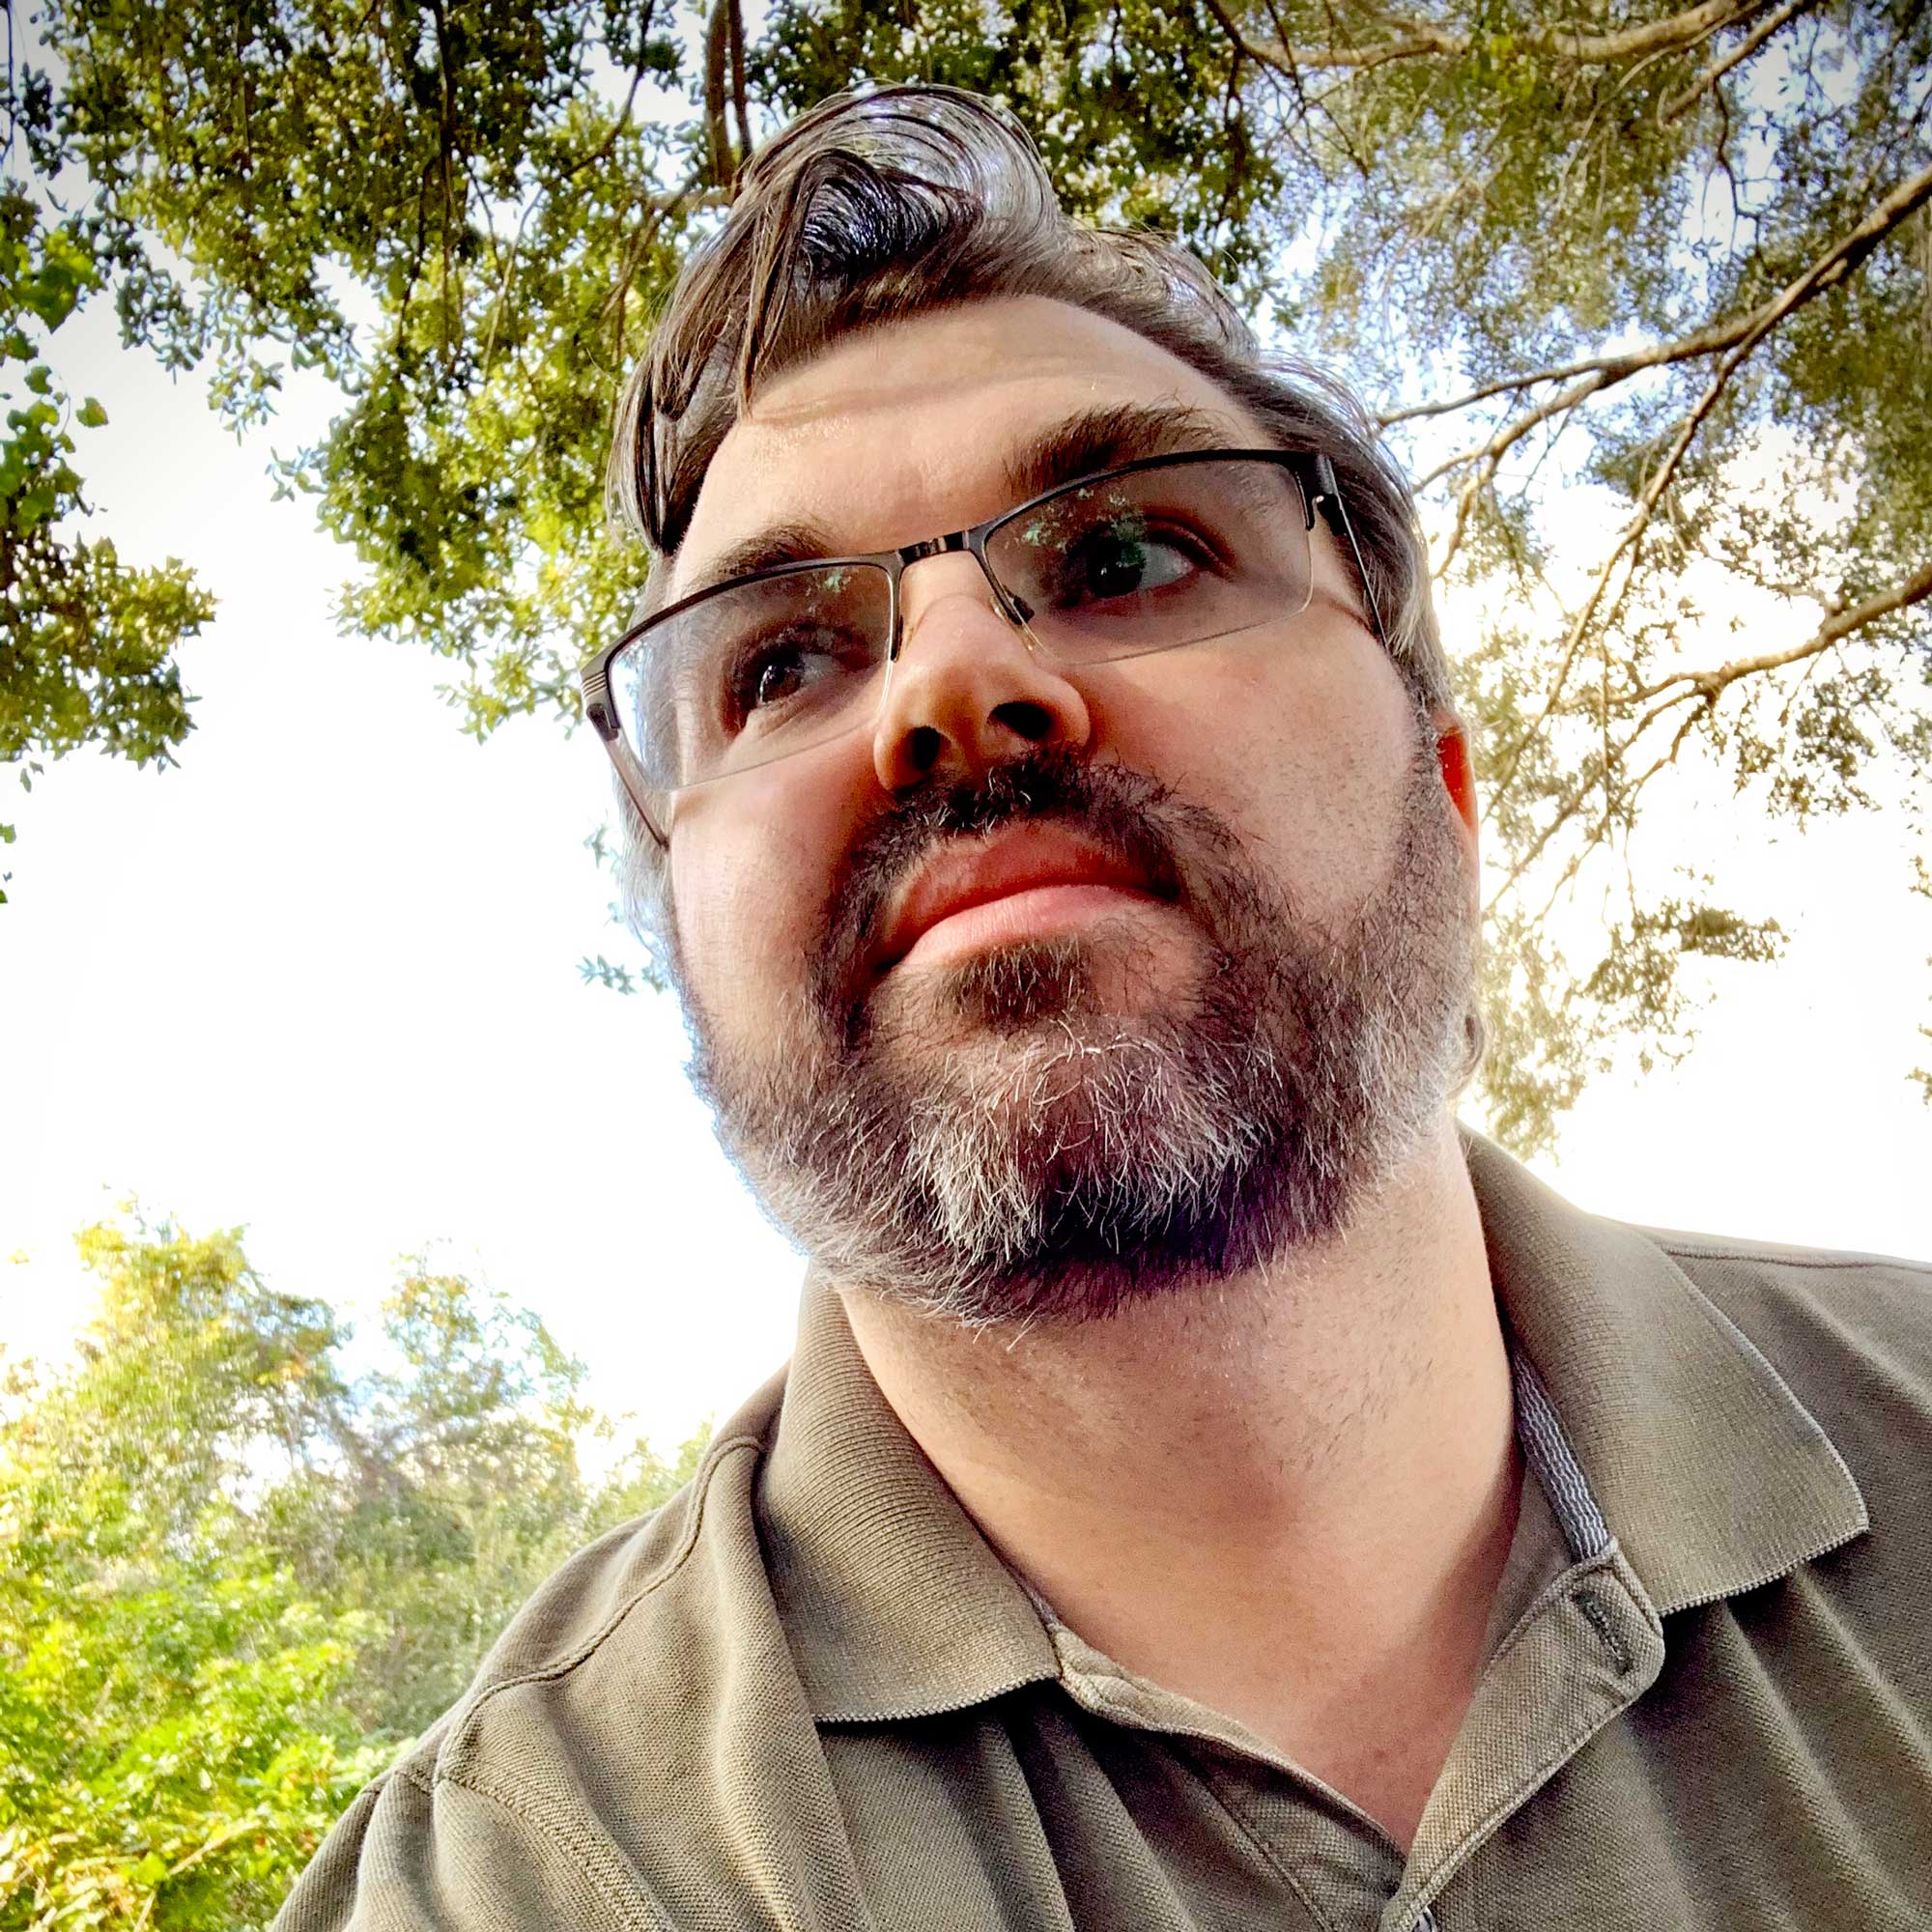 Photo of a bearded man wearing glasses in front of a clear blue sky and tree foliage.